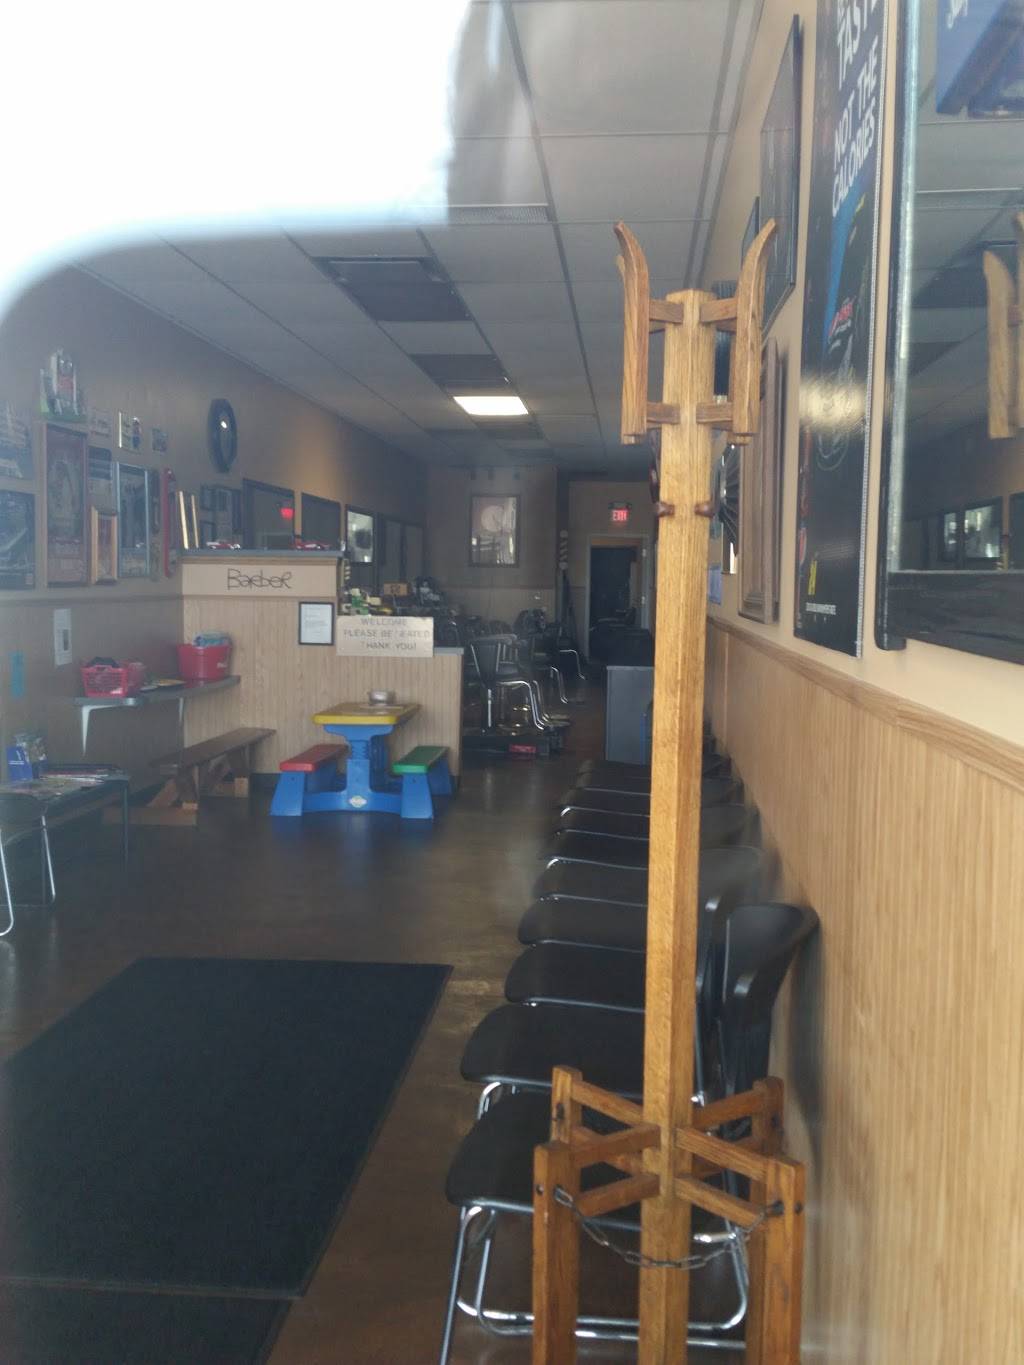 West Valley Barber Shop | 429 W Bagley Rd, Berea, OH 44017 | Phone: (440) 891-4247